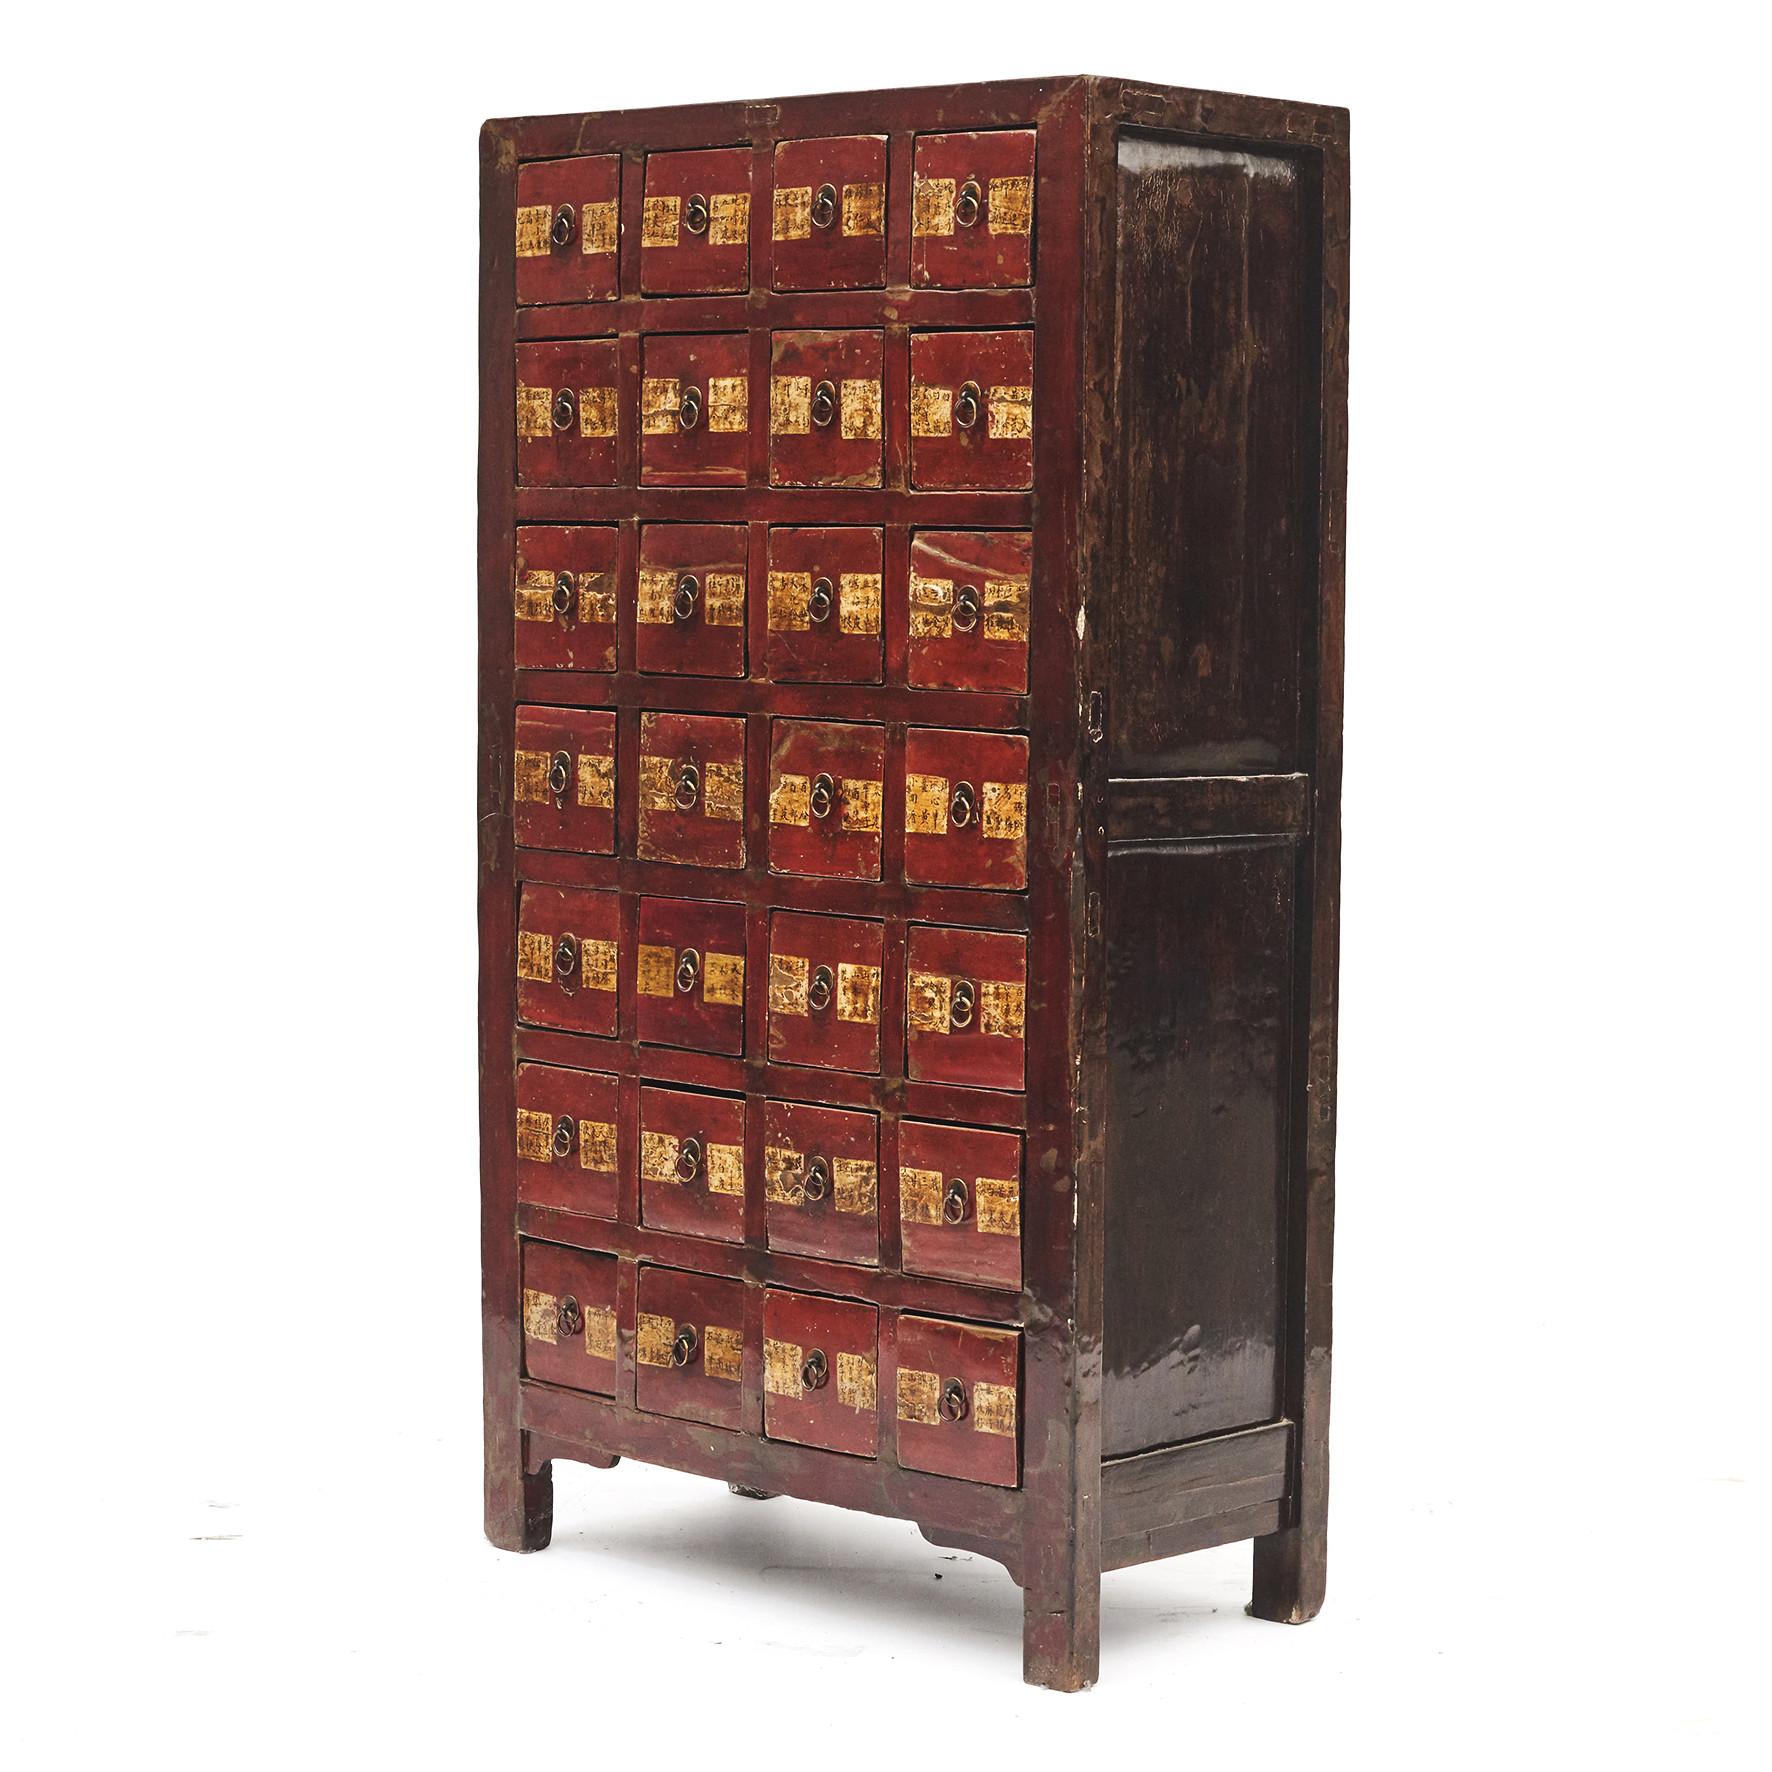 Qing Chinese Apothecary 'Farmacy' Medicine Chest